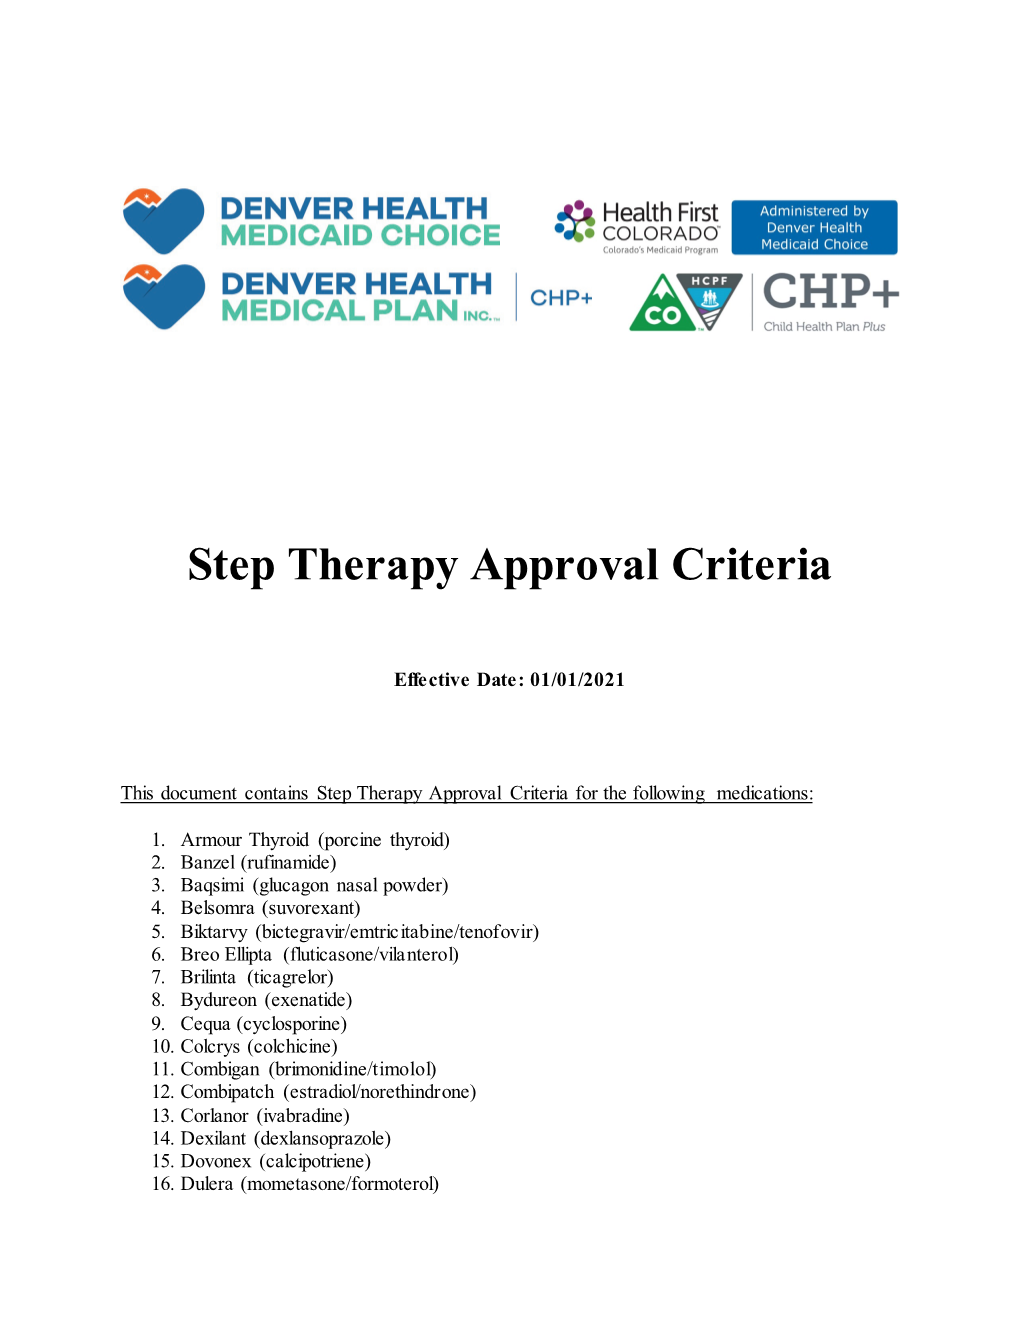 Step Therapy Approval Criteria